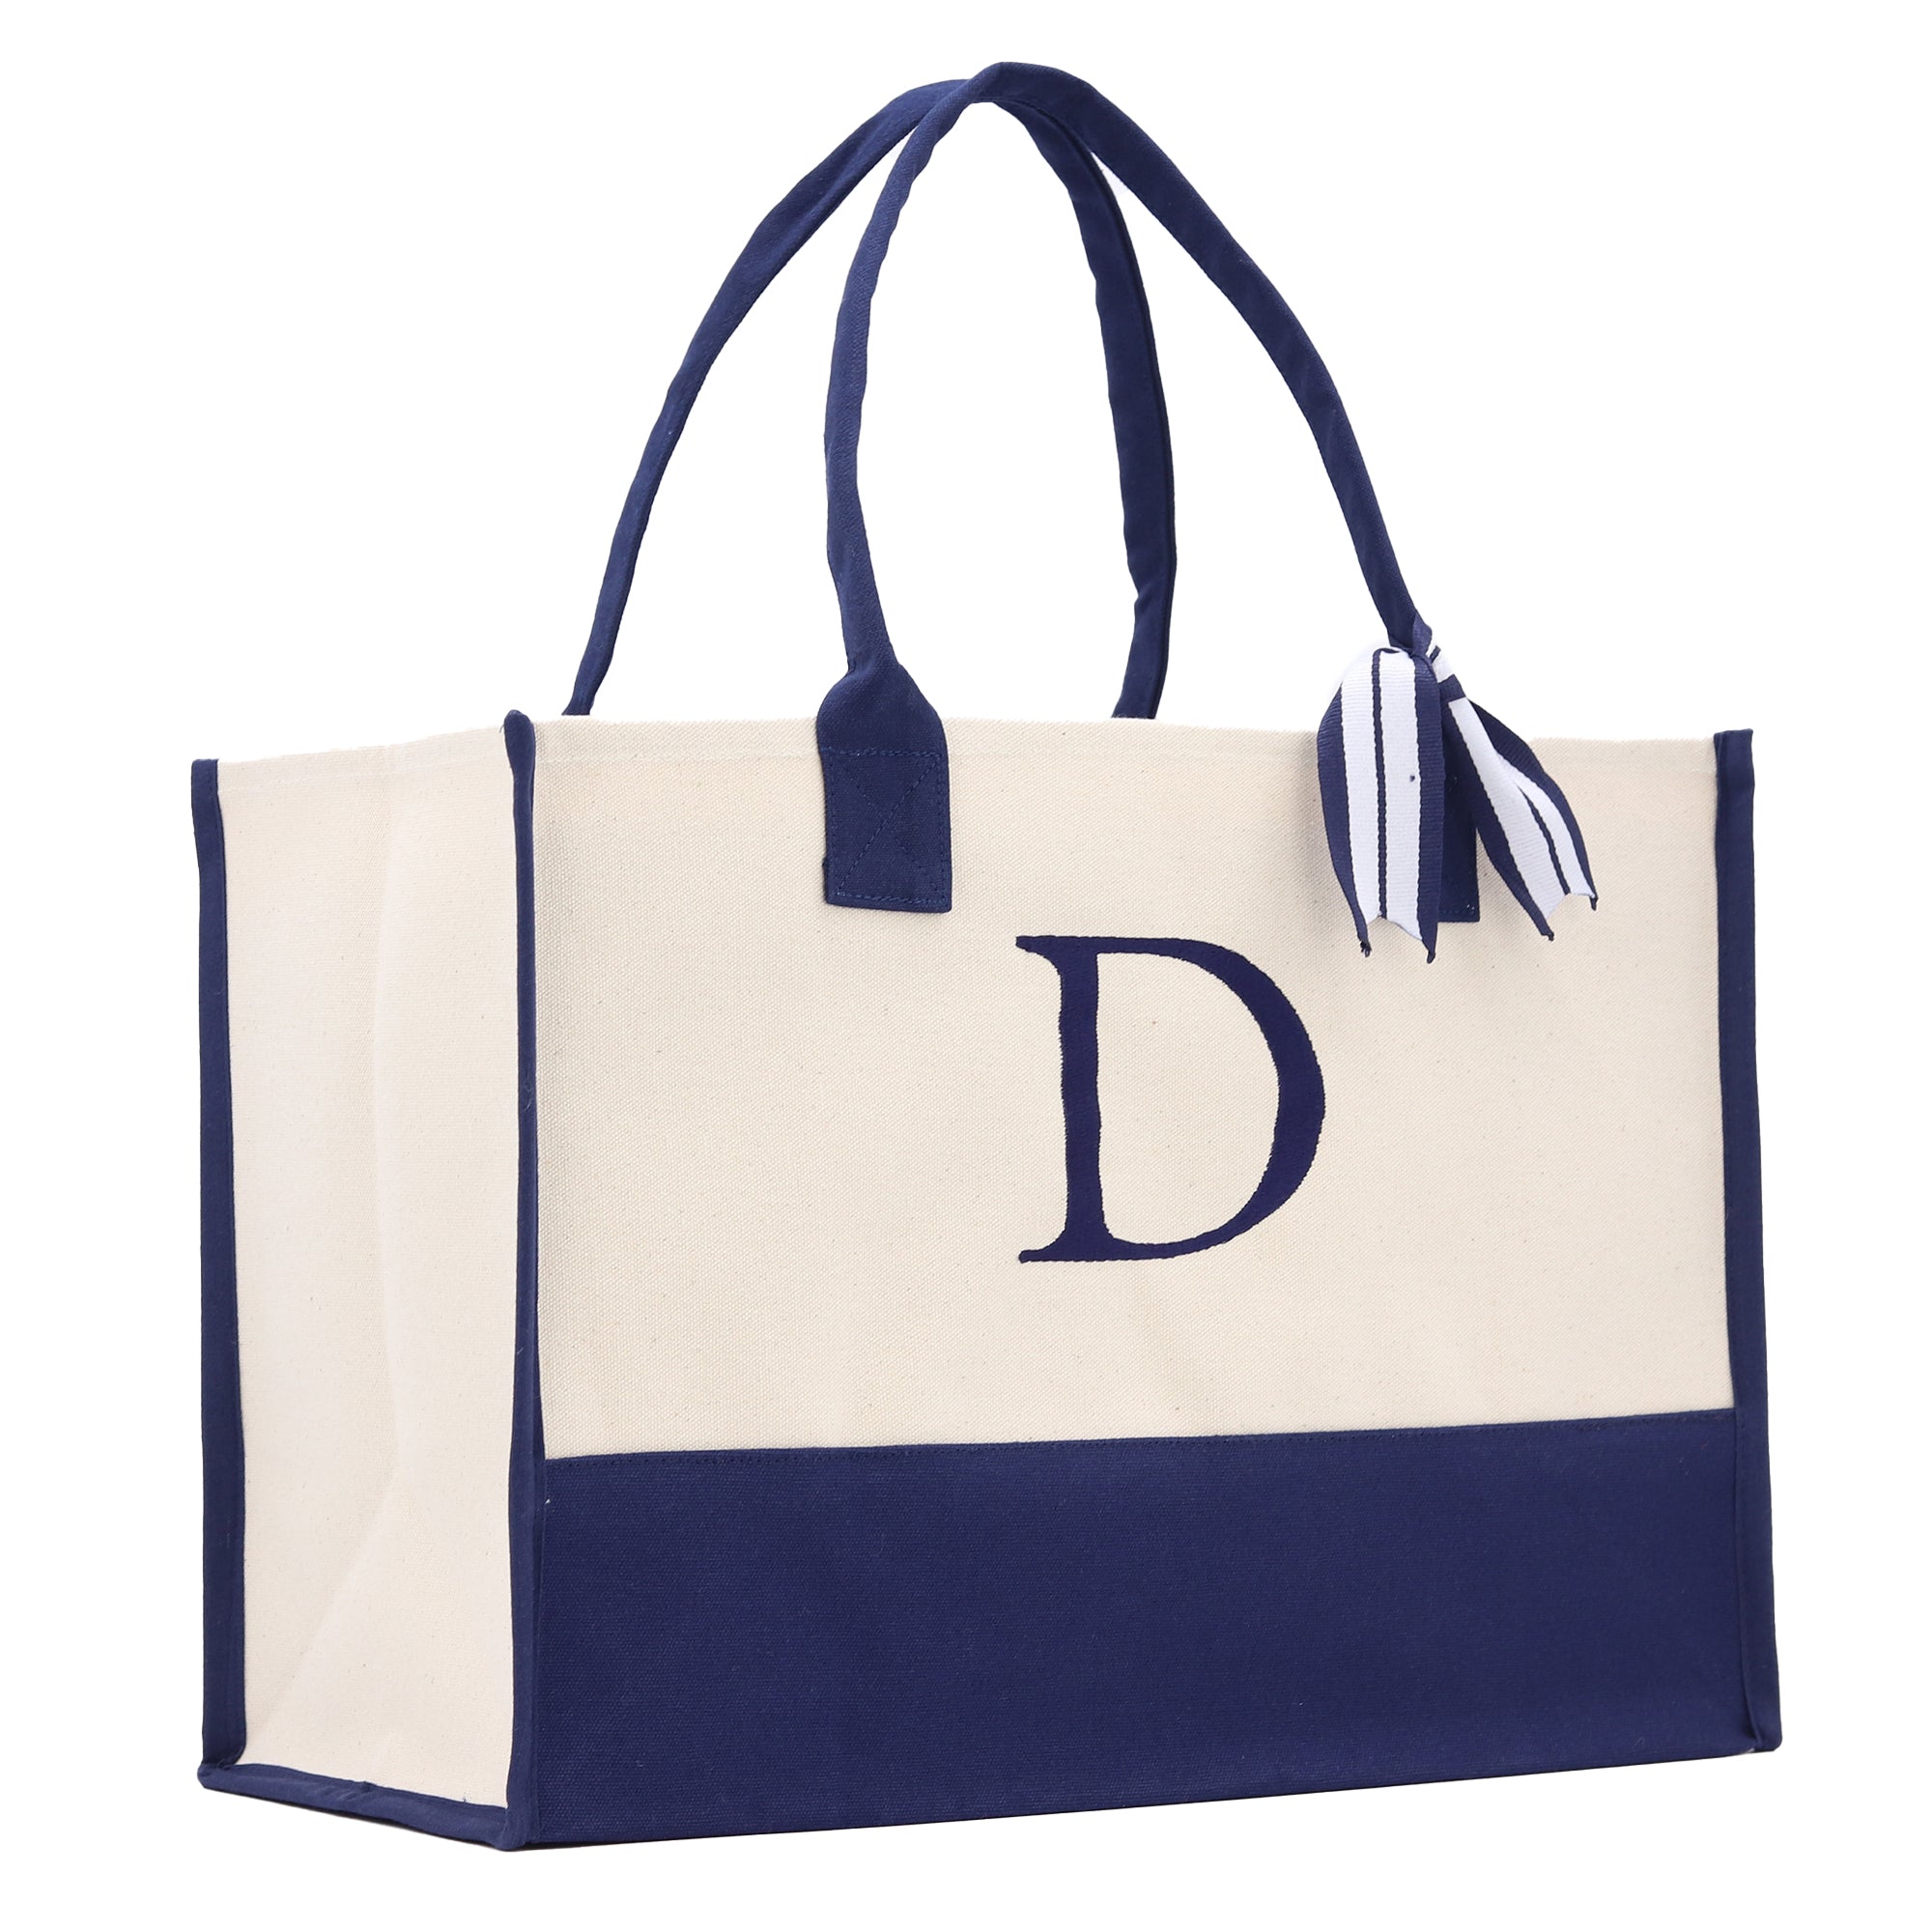 Monogram Tote Bag with 100% Cotton Canvas and a Chic Personalized Monogram Navy Blue Vanessa Rosella Block D 